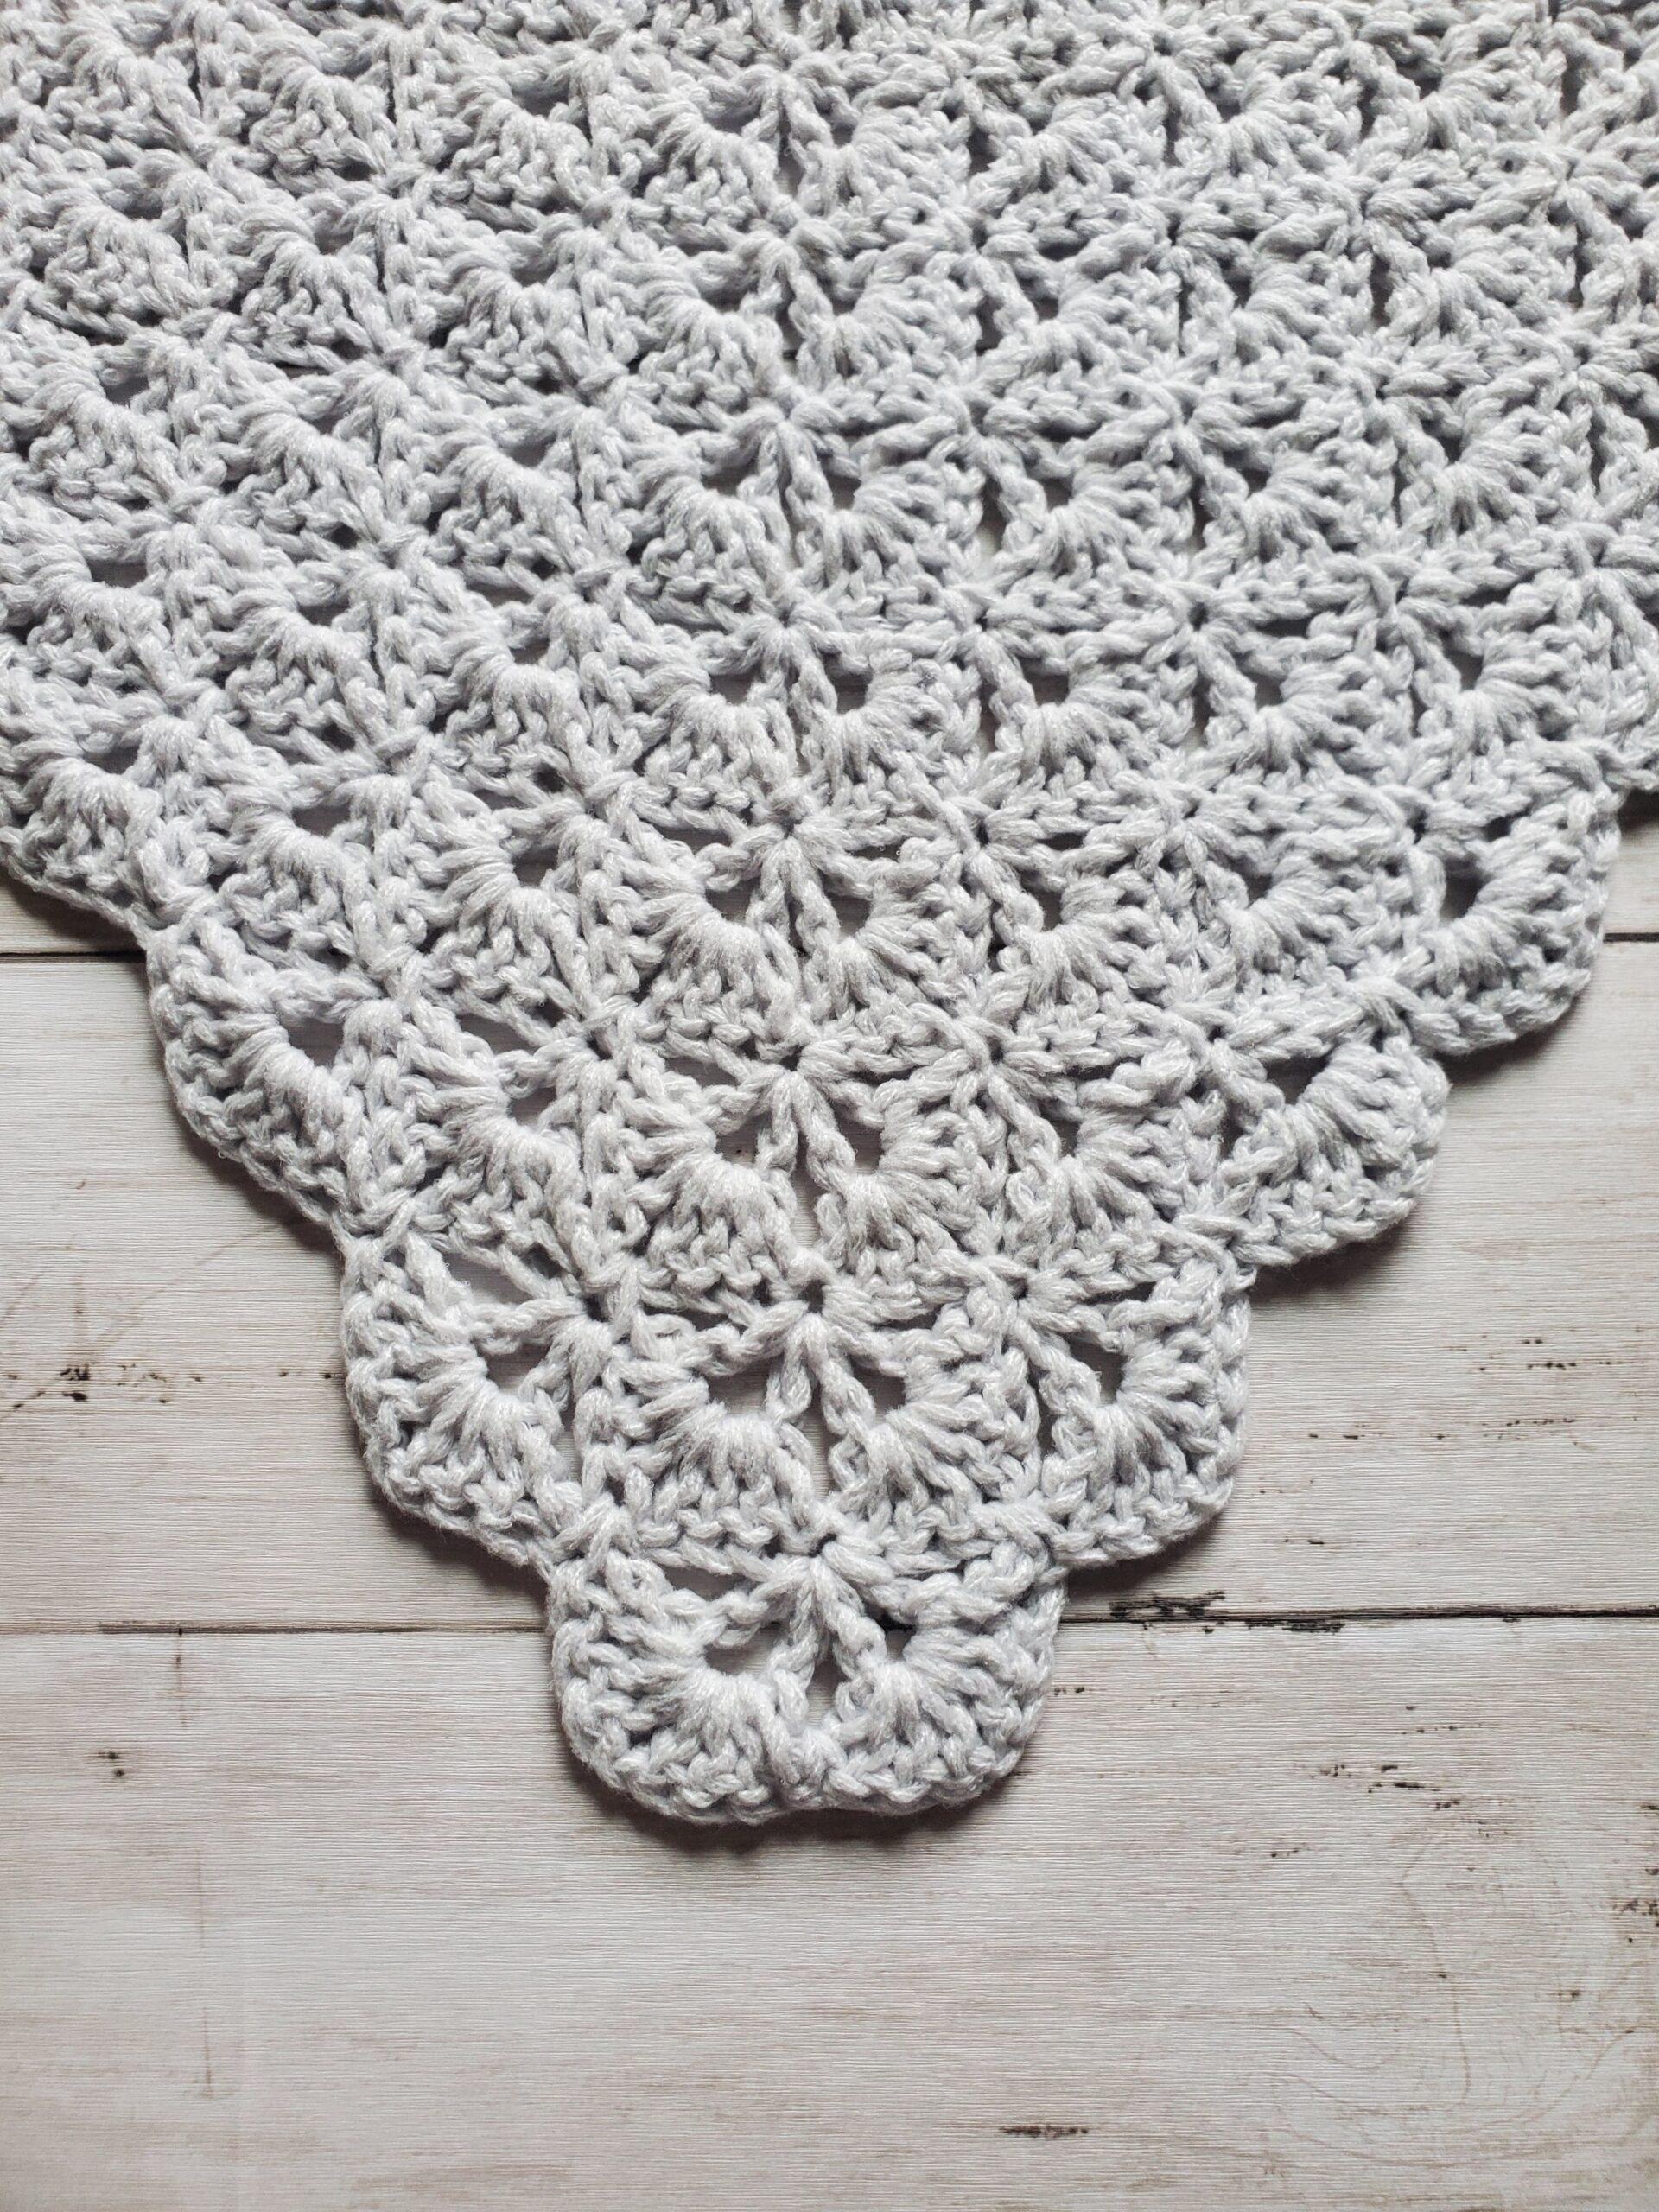 Crochet Shell Blanket in the Round